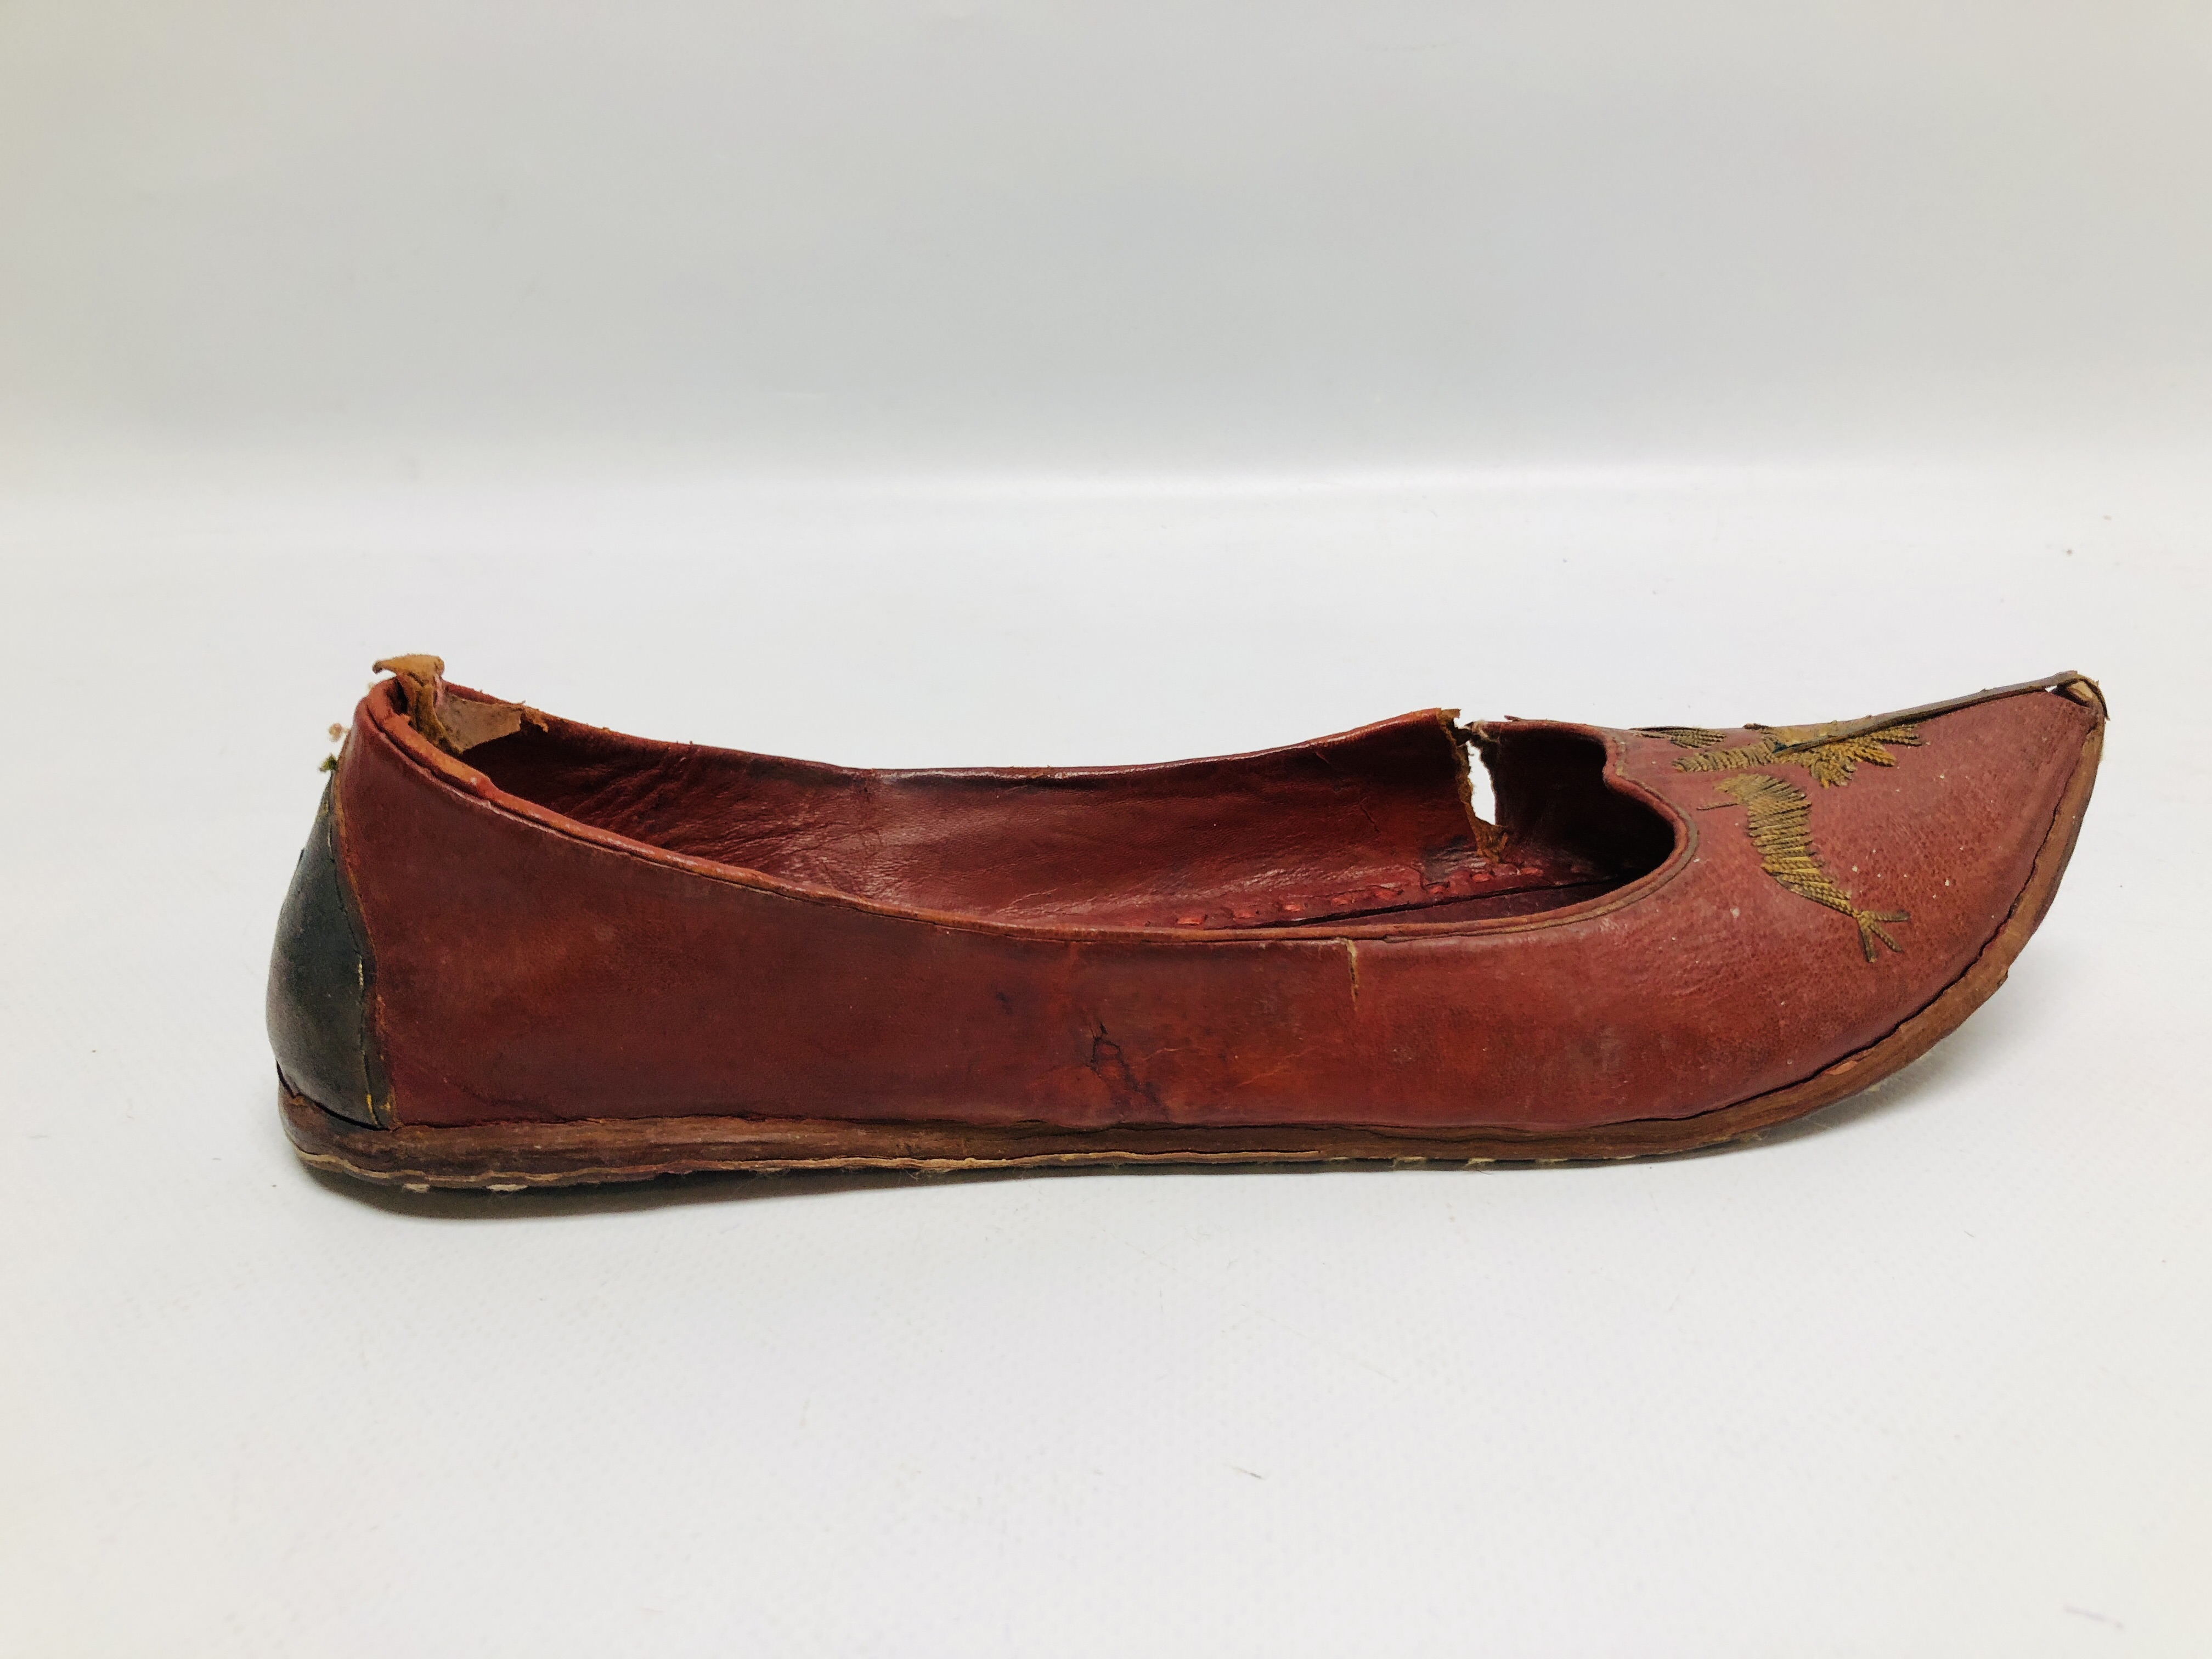 PAIR OF EARLY C20TH AFGHAN LEATHER SHOES WITH GOLD THREAD EMBROIDERY. - Image 5 of 10